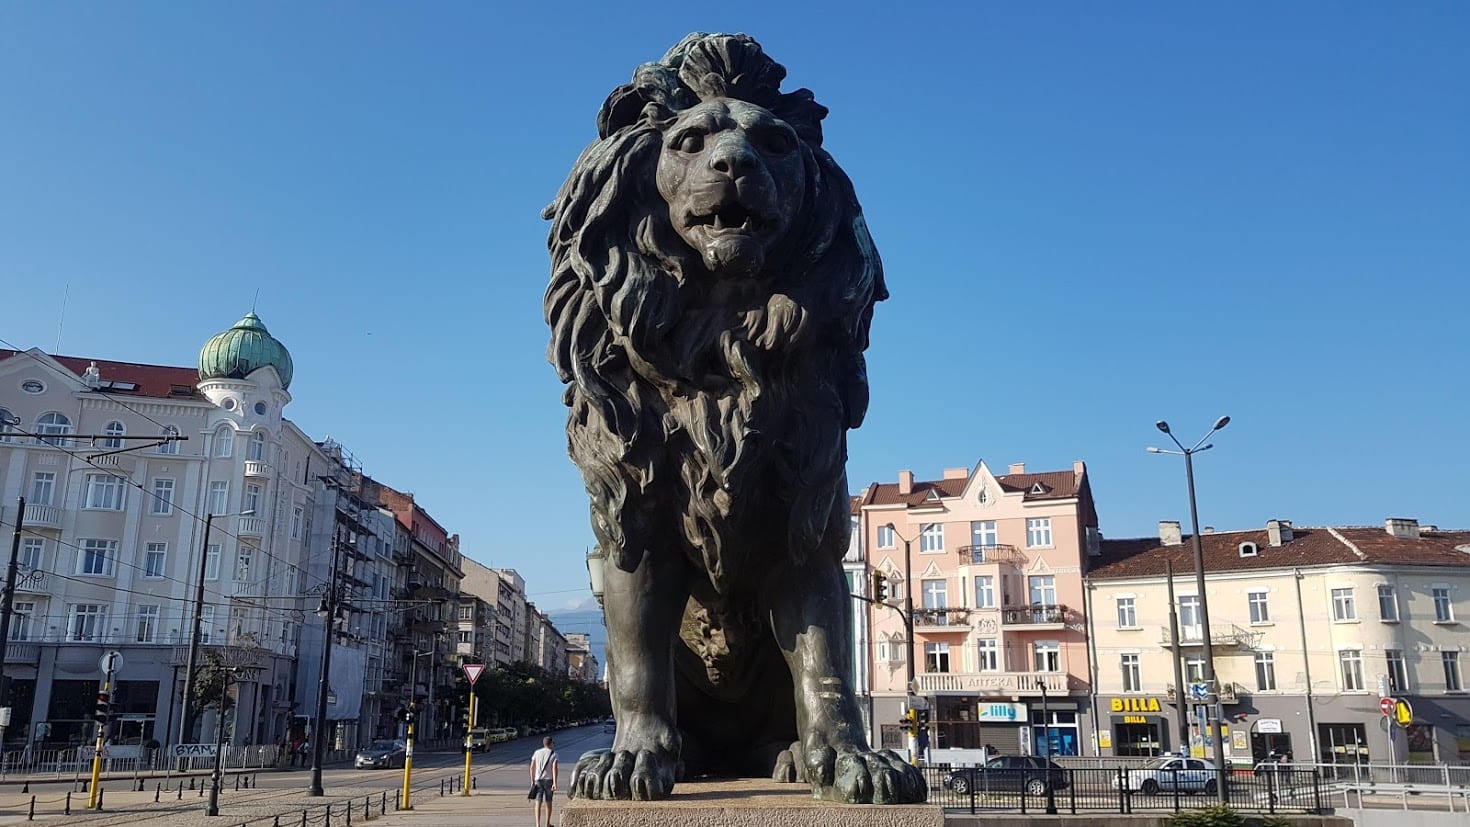 If you are looking what to do in Sofia in one day, check out the Lion's Bridge in Sofia, Bulgaria